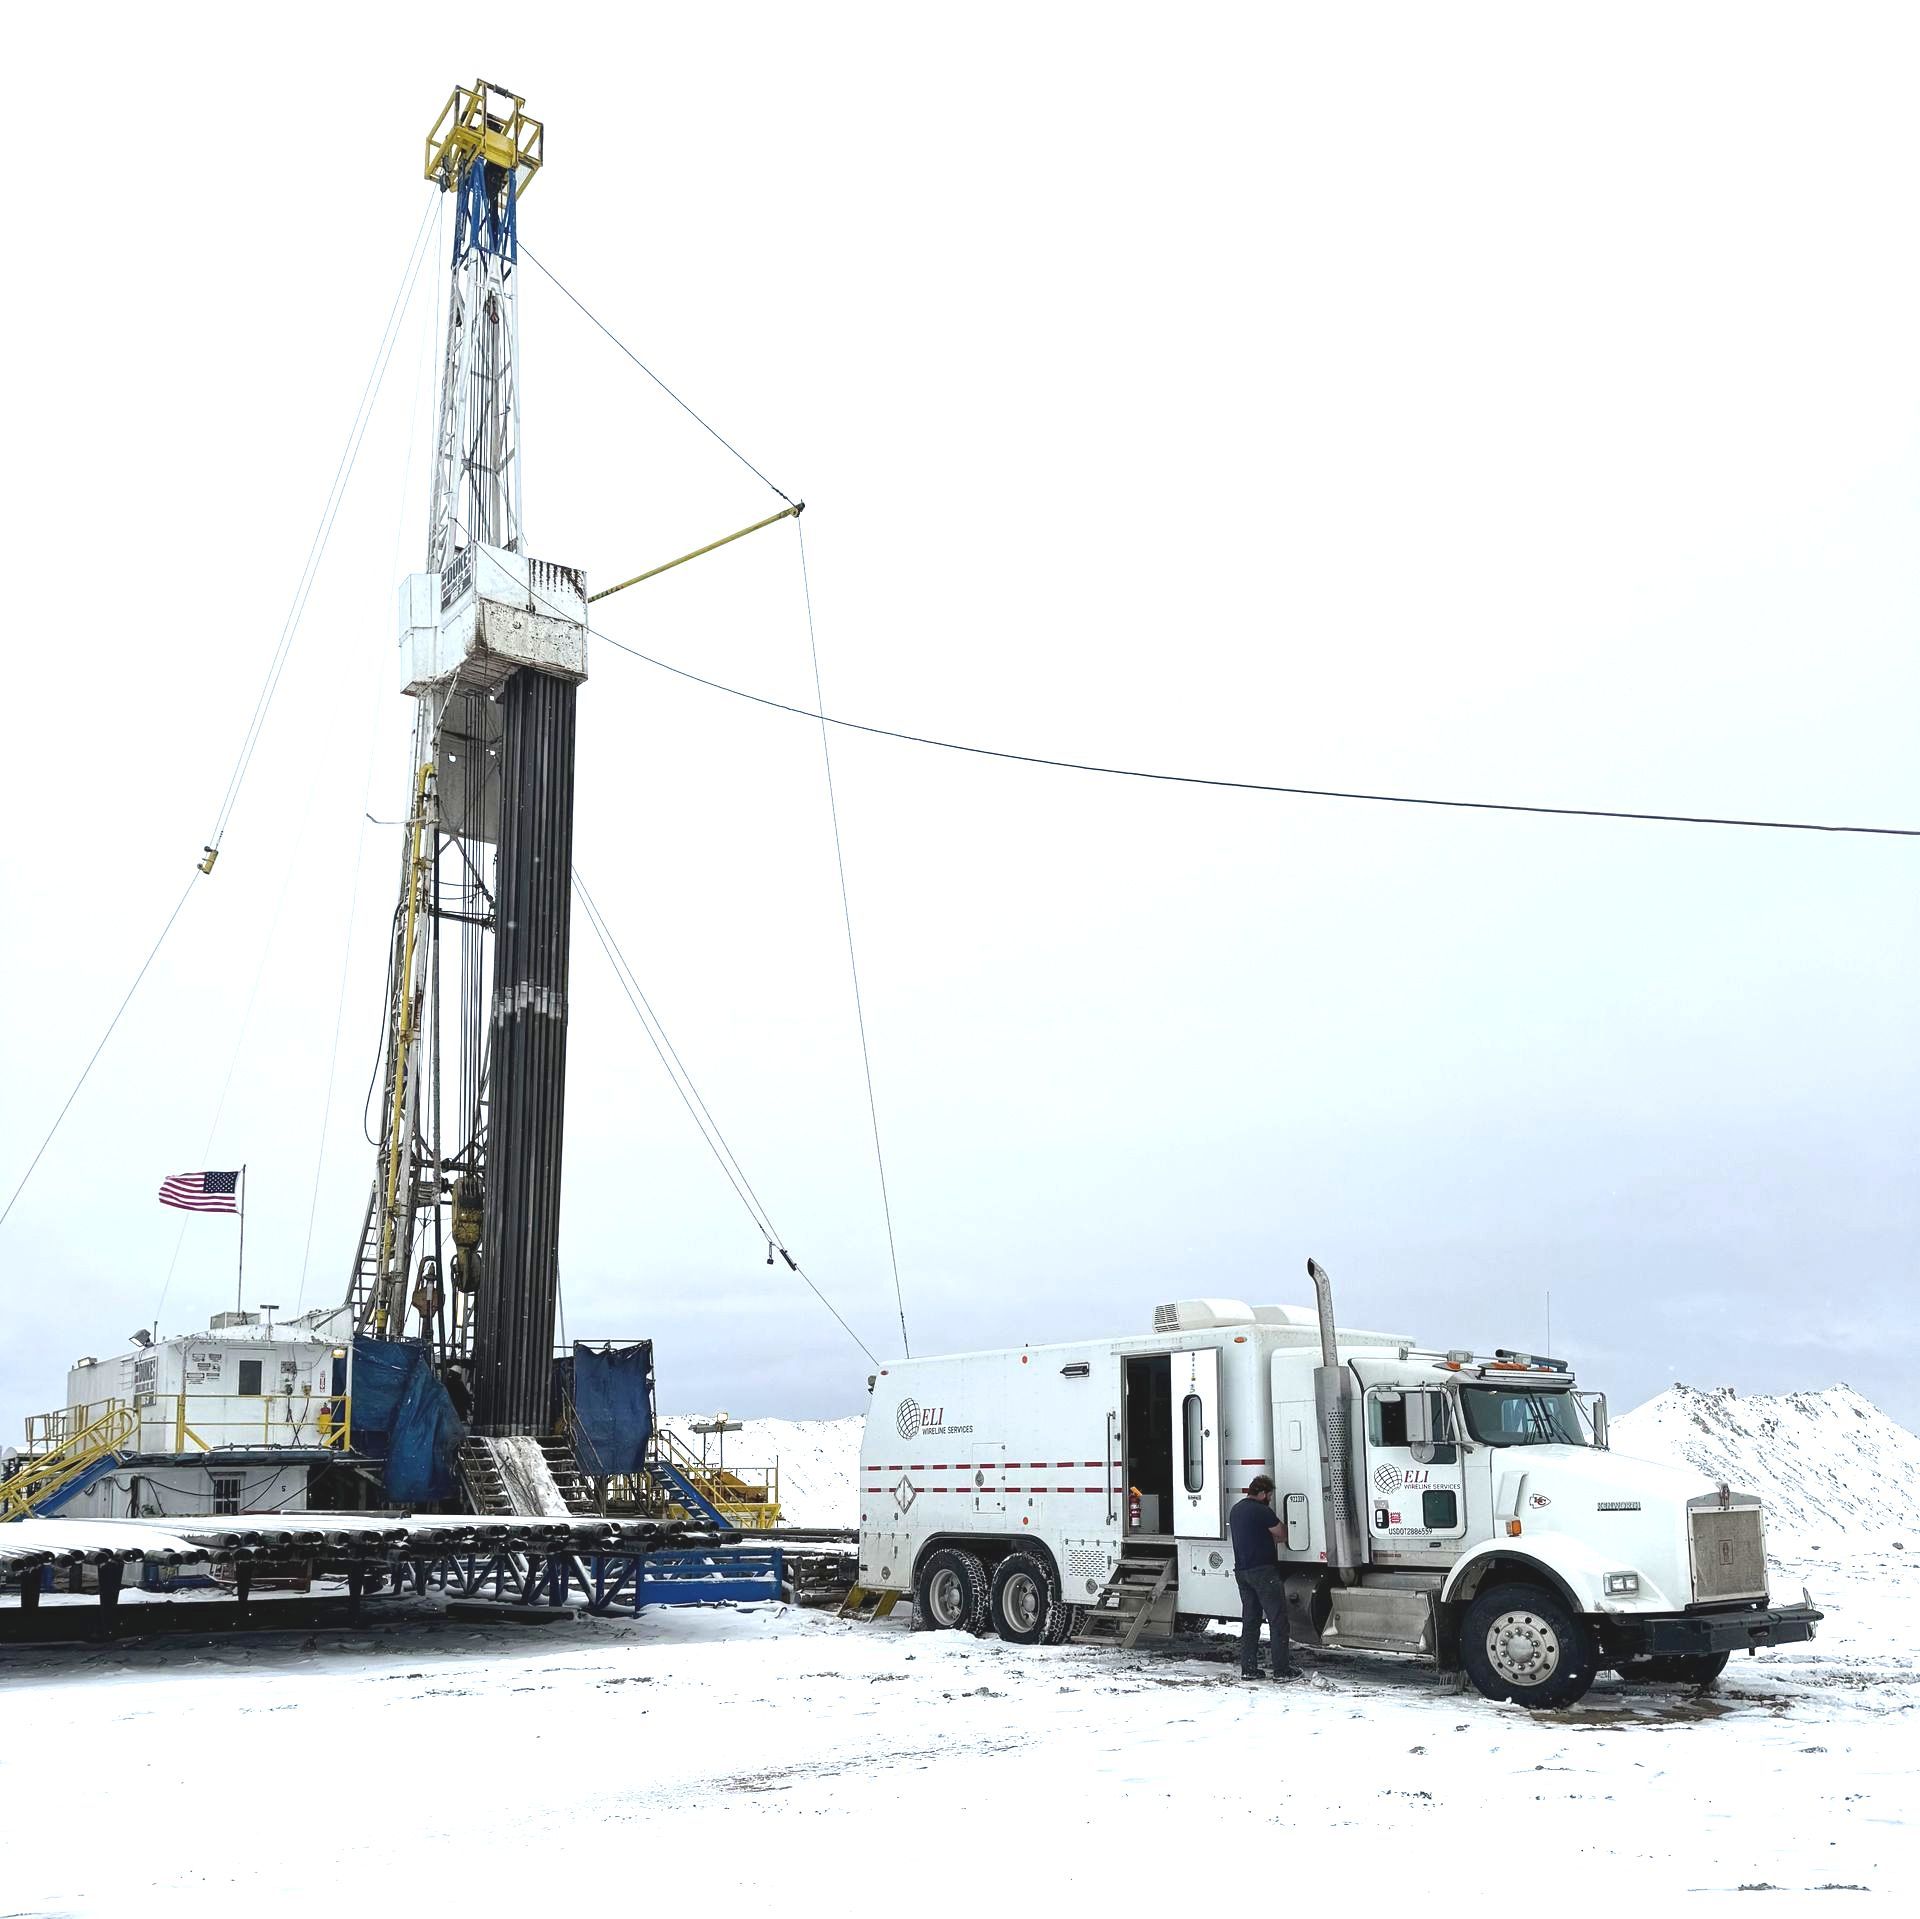 A truck is parked next to a drilling rig in the snow.